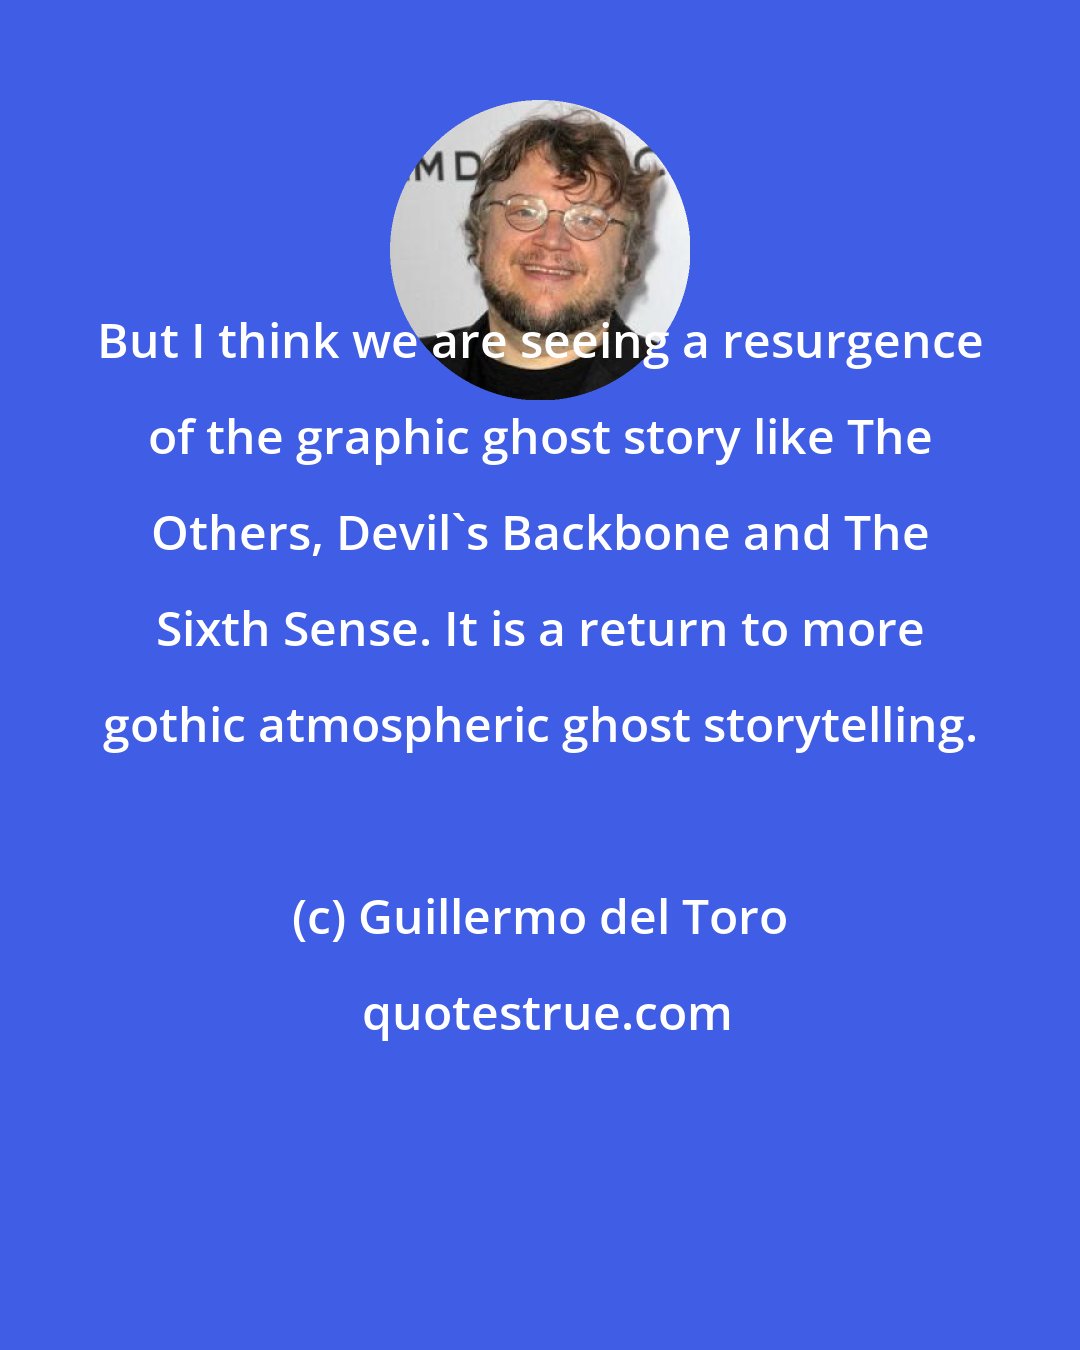 Guillermo del Toro: But I think we are seeing a resurgence of the graphic ghost story like The Others, Devil's Backbone and The Sixth Sense. It is a return to more gothic atmospheric ghost storytelling.